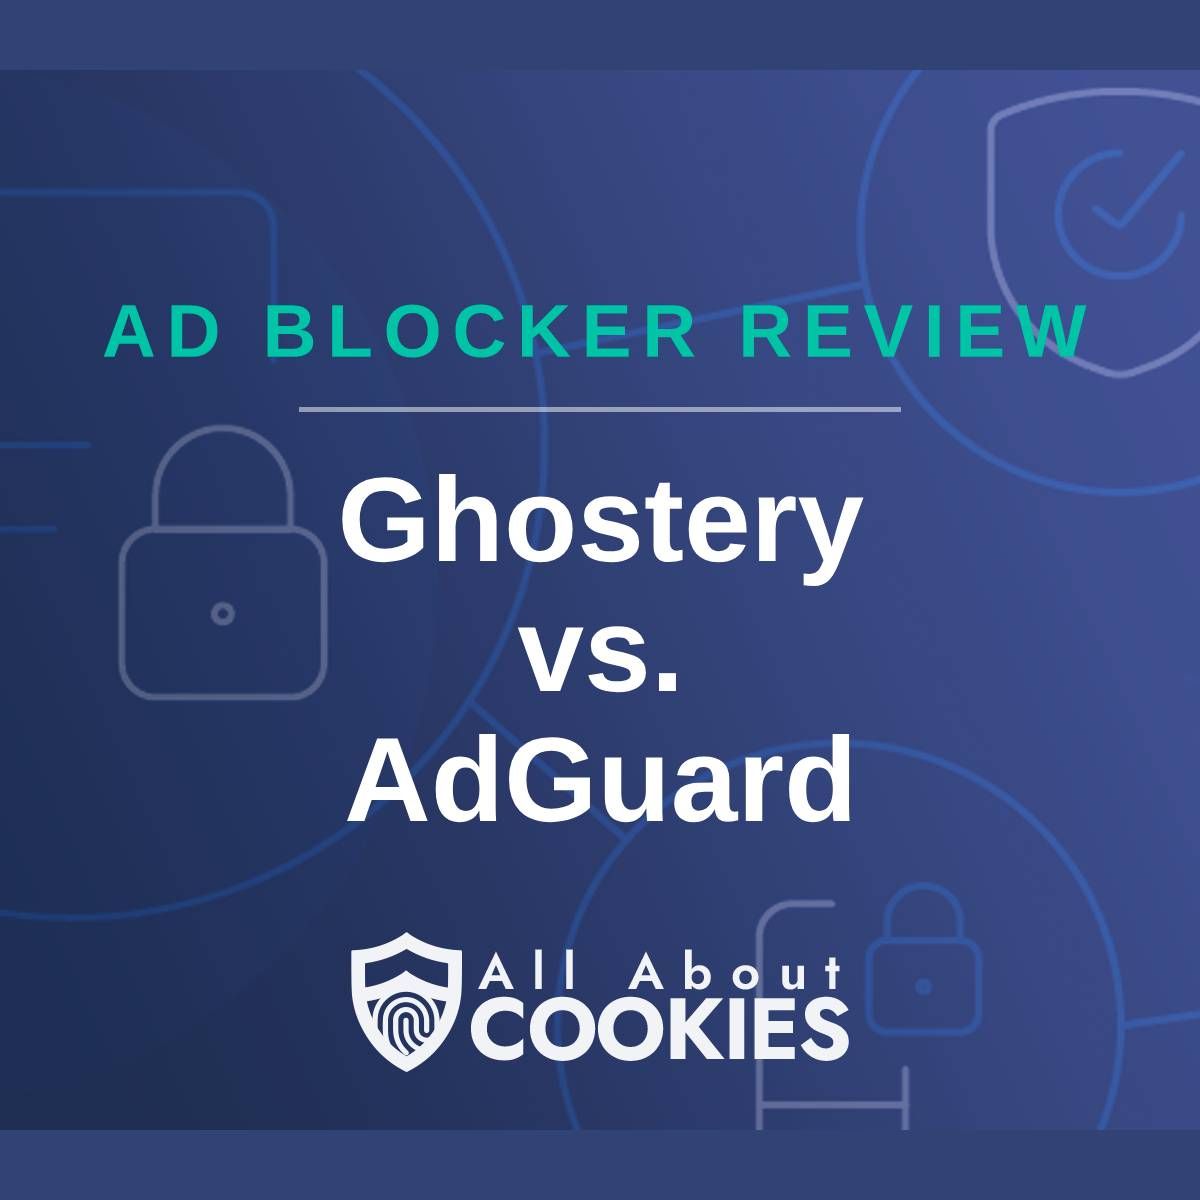 A blue background with images of locks and shields and the text "Ghostery vs. AdGuard"